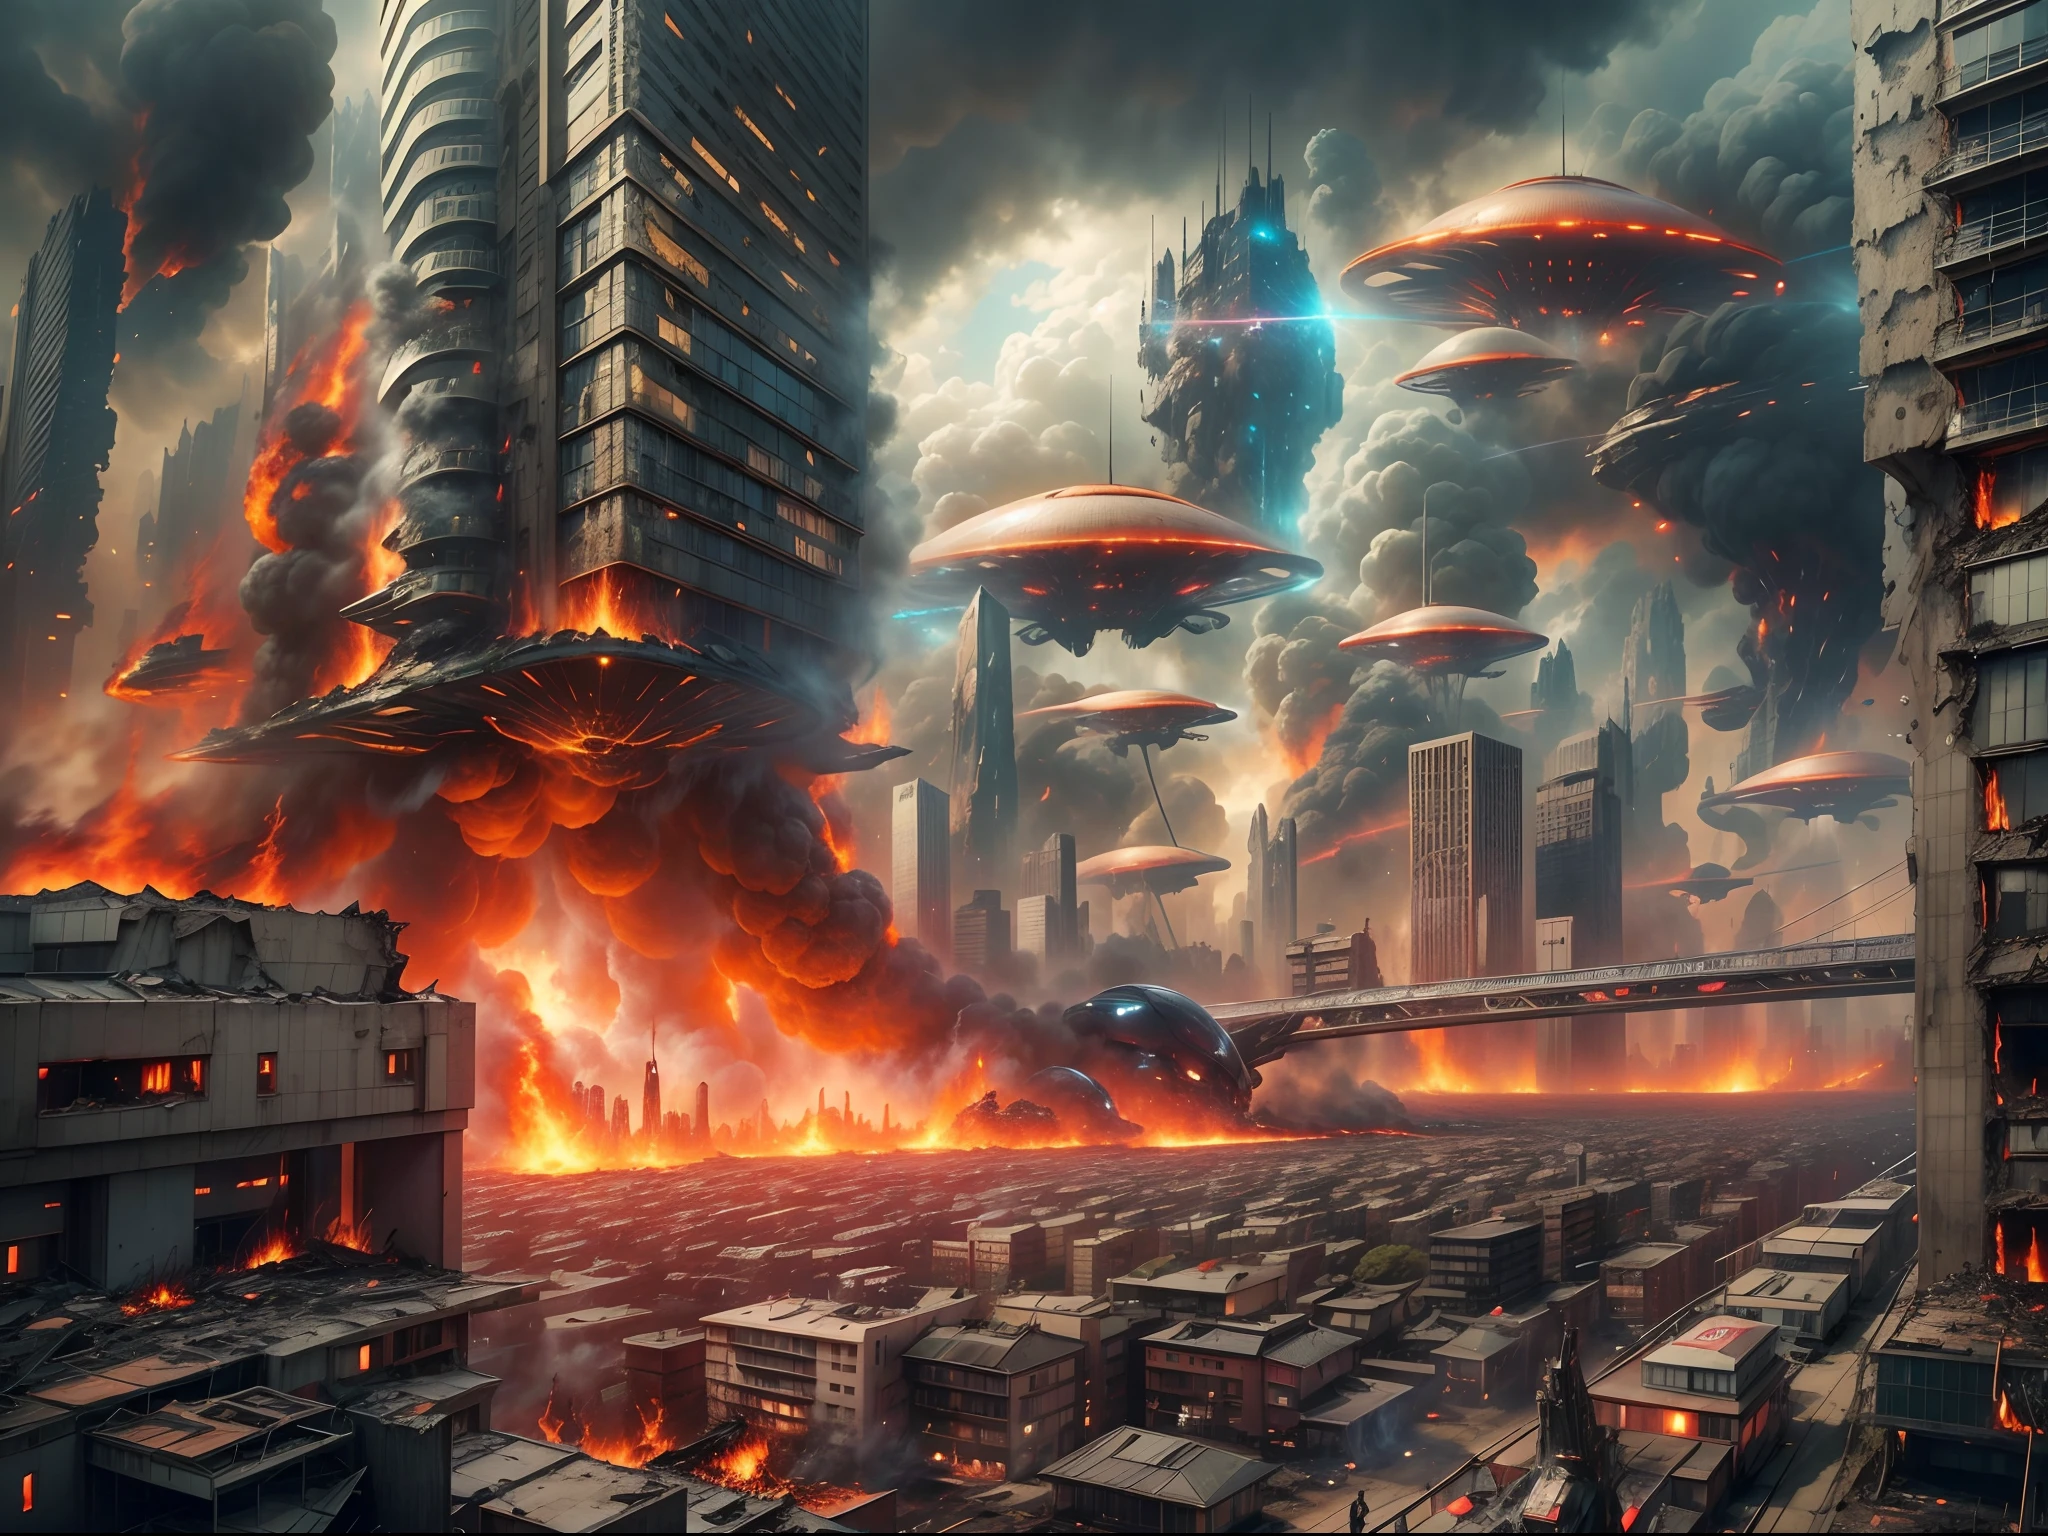 "An extraordinary image capturing a futuristic Tokyo under invasion by alien forces. the alien destroy the city by shooting laser to it, the alien ship shooting lazer beam to the city,  city and building was on fire, destroyed city, collapse d building and house, fire, burning street,fire, marvel style alien airship looms overhead, accompanied by a swarm of smaller alien vessels."